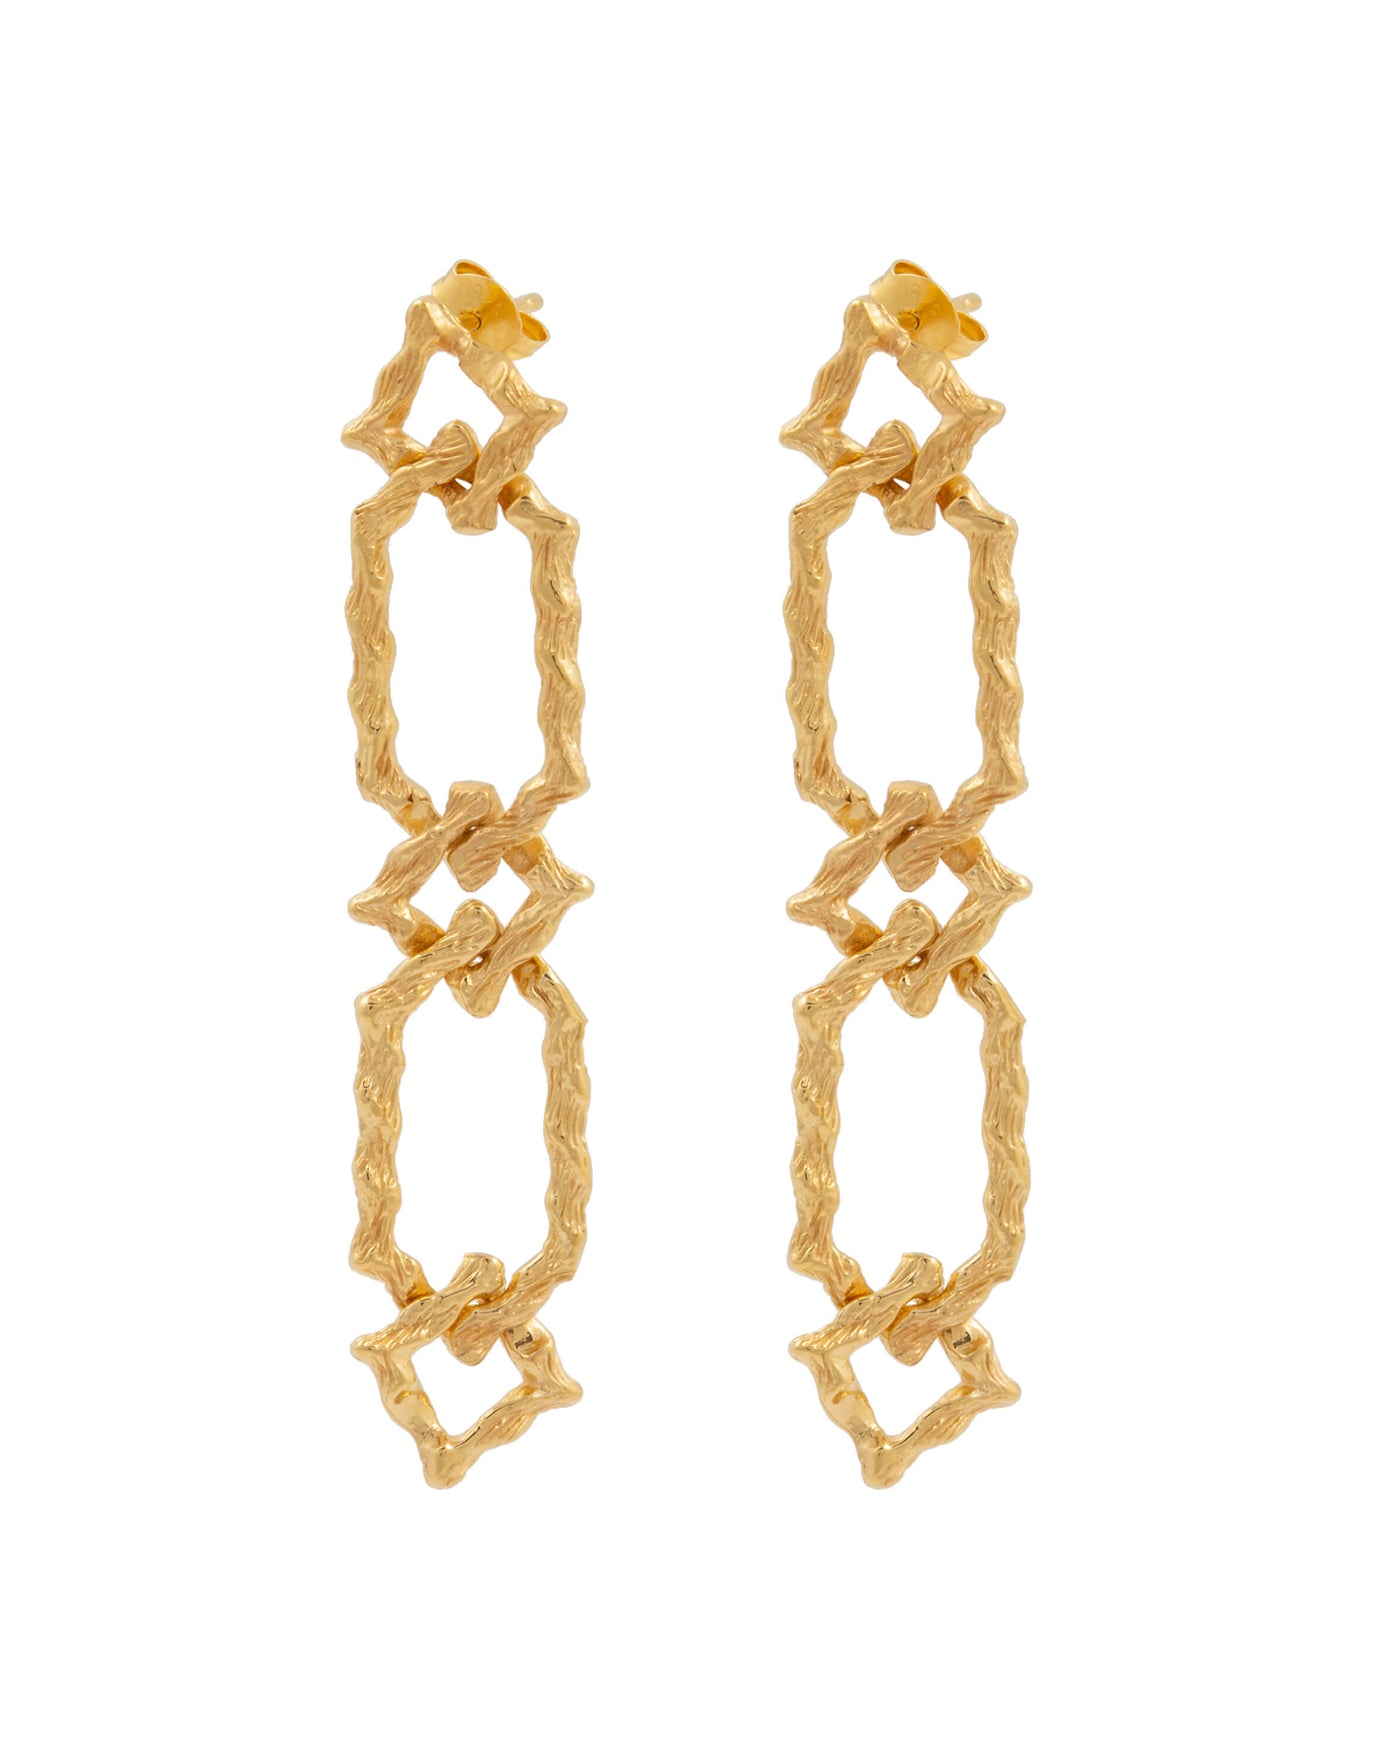 Silver Linked Chain Earrings. Gold plated